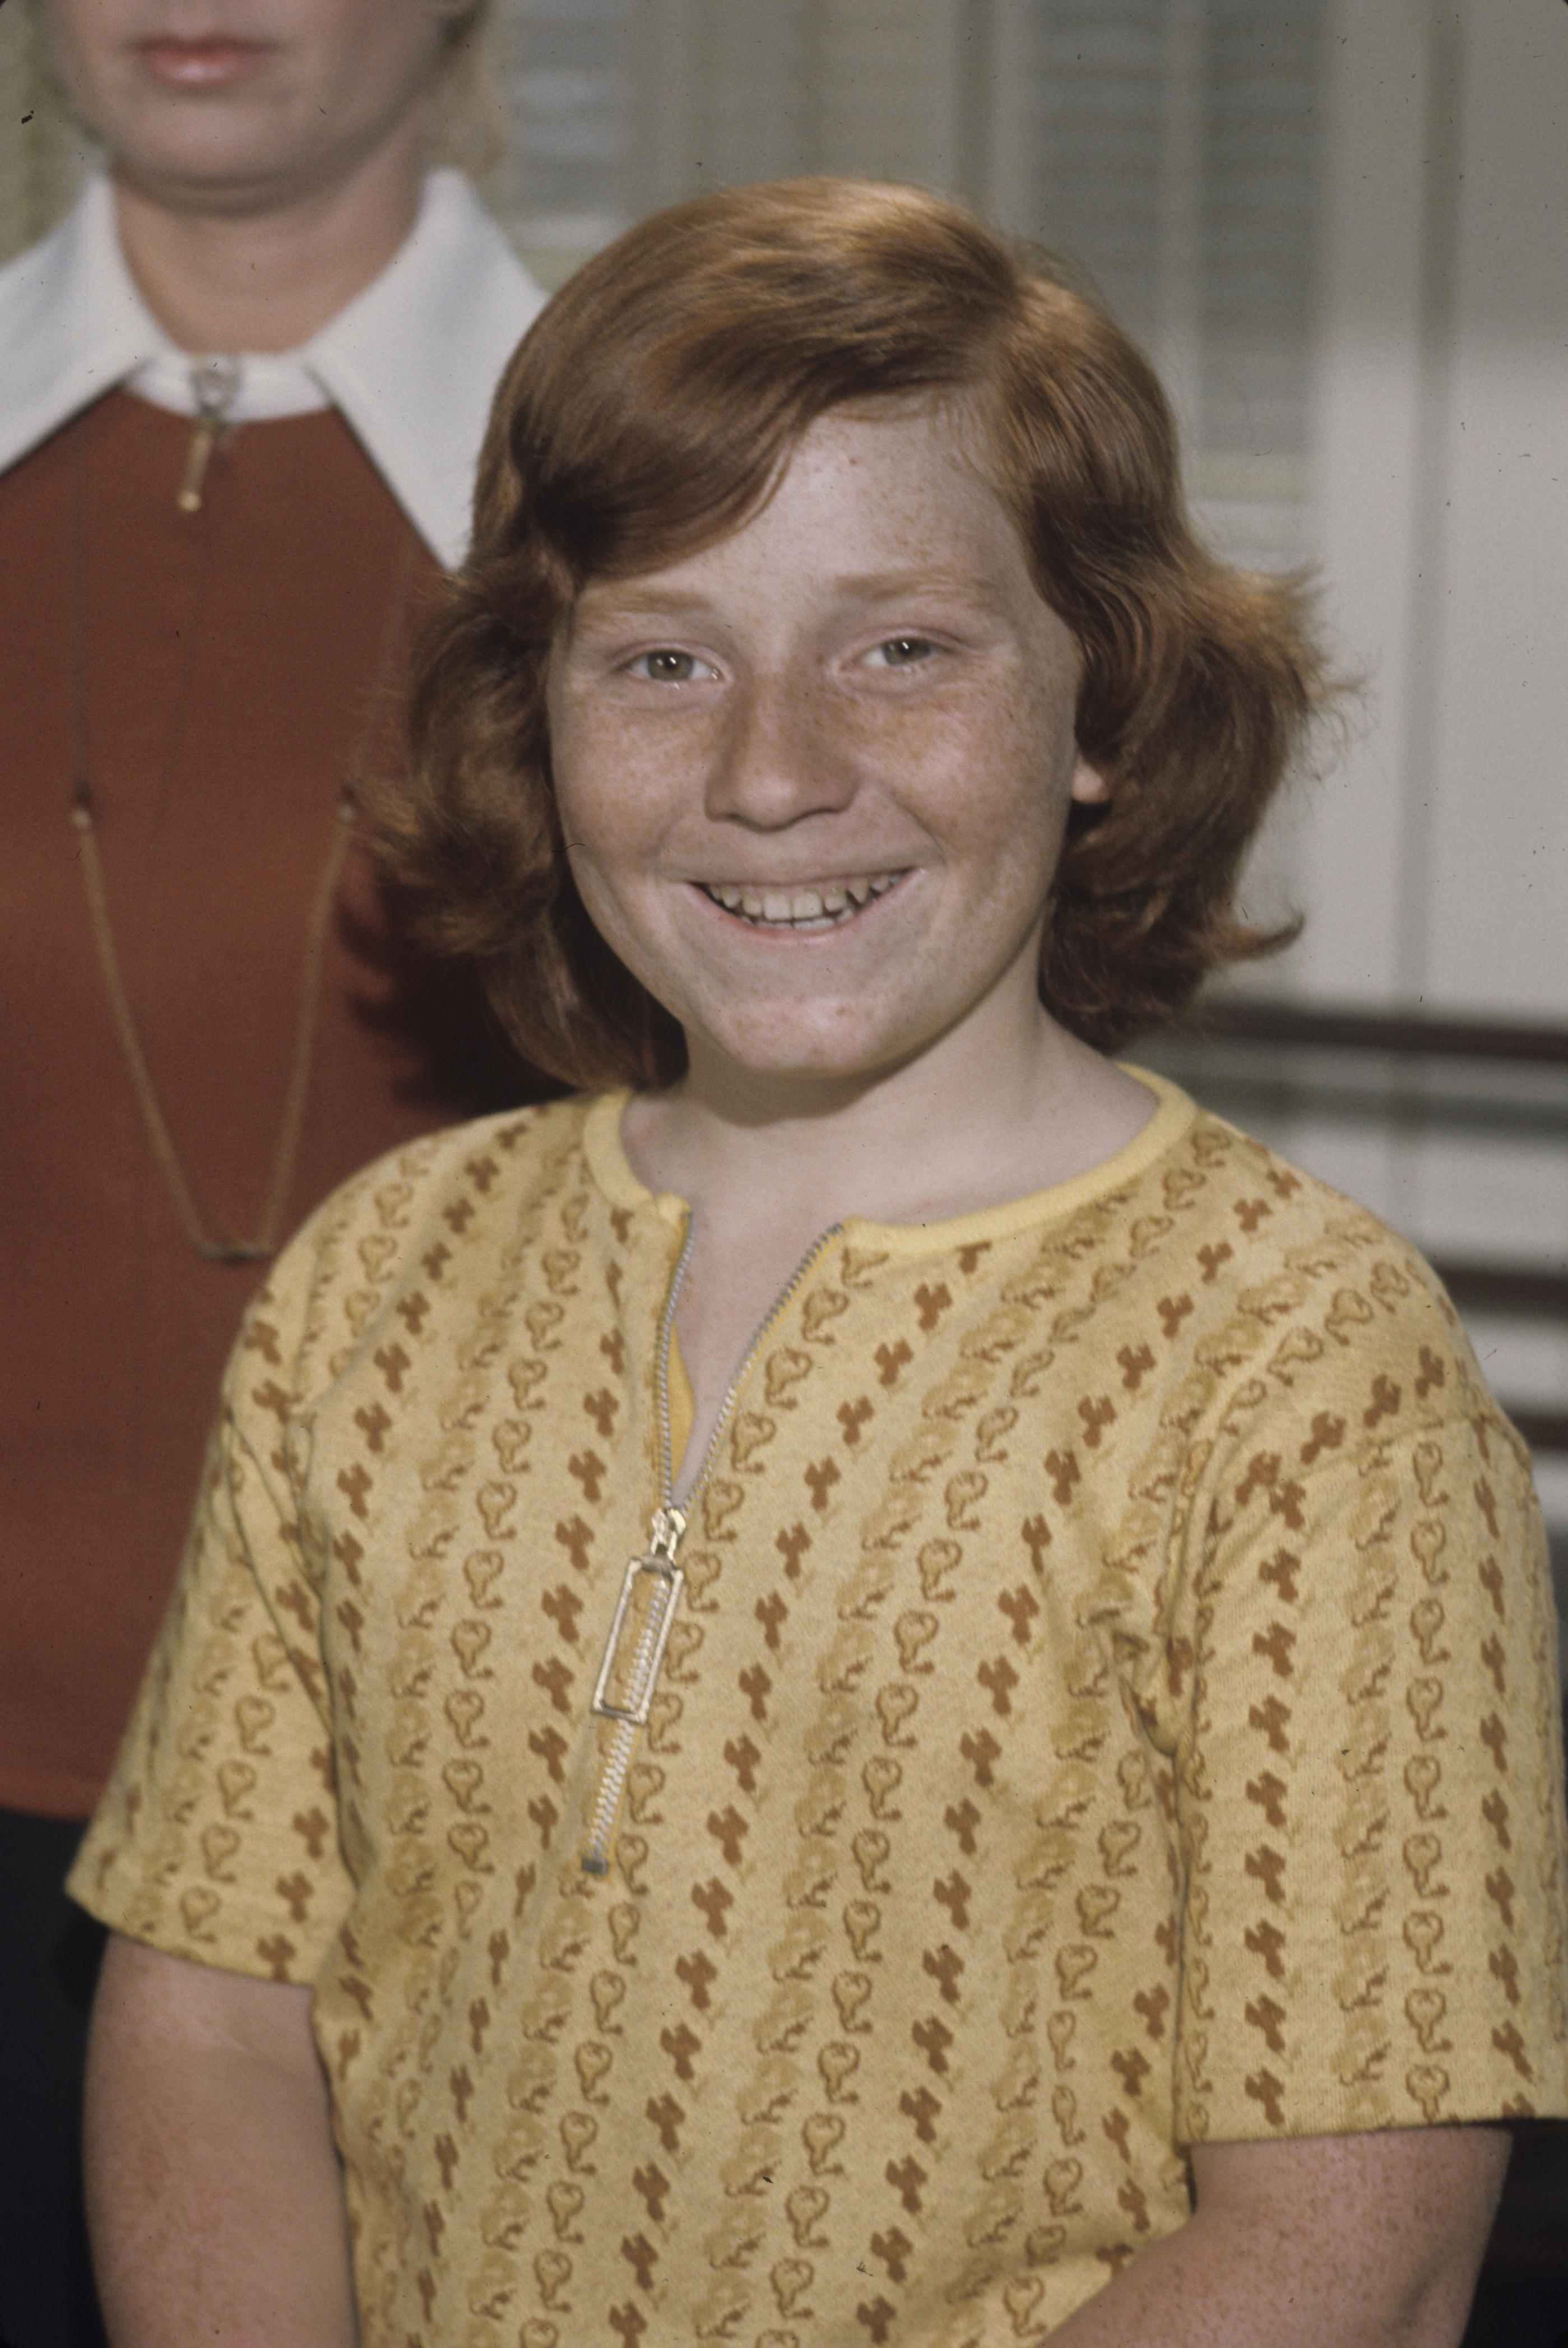 The actor in 1973 for the television series, "The Partridge Family." | Source: Getty Images